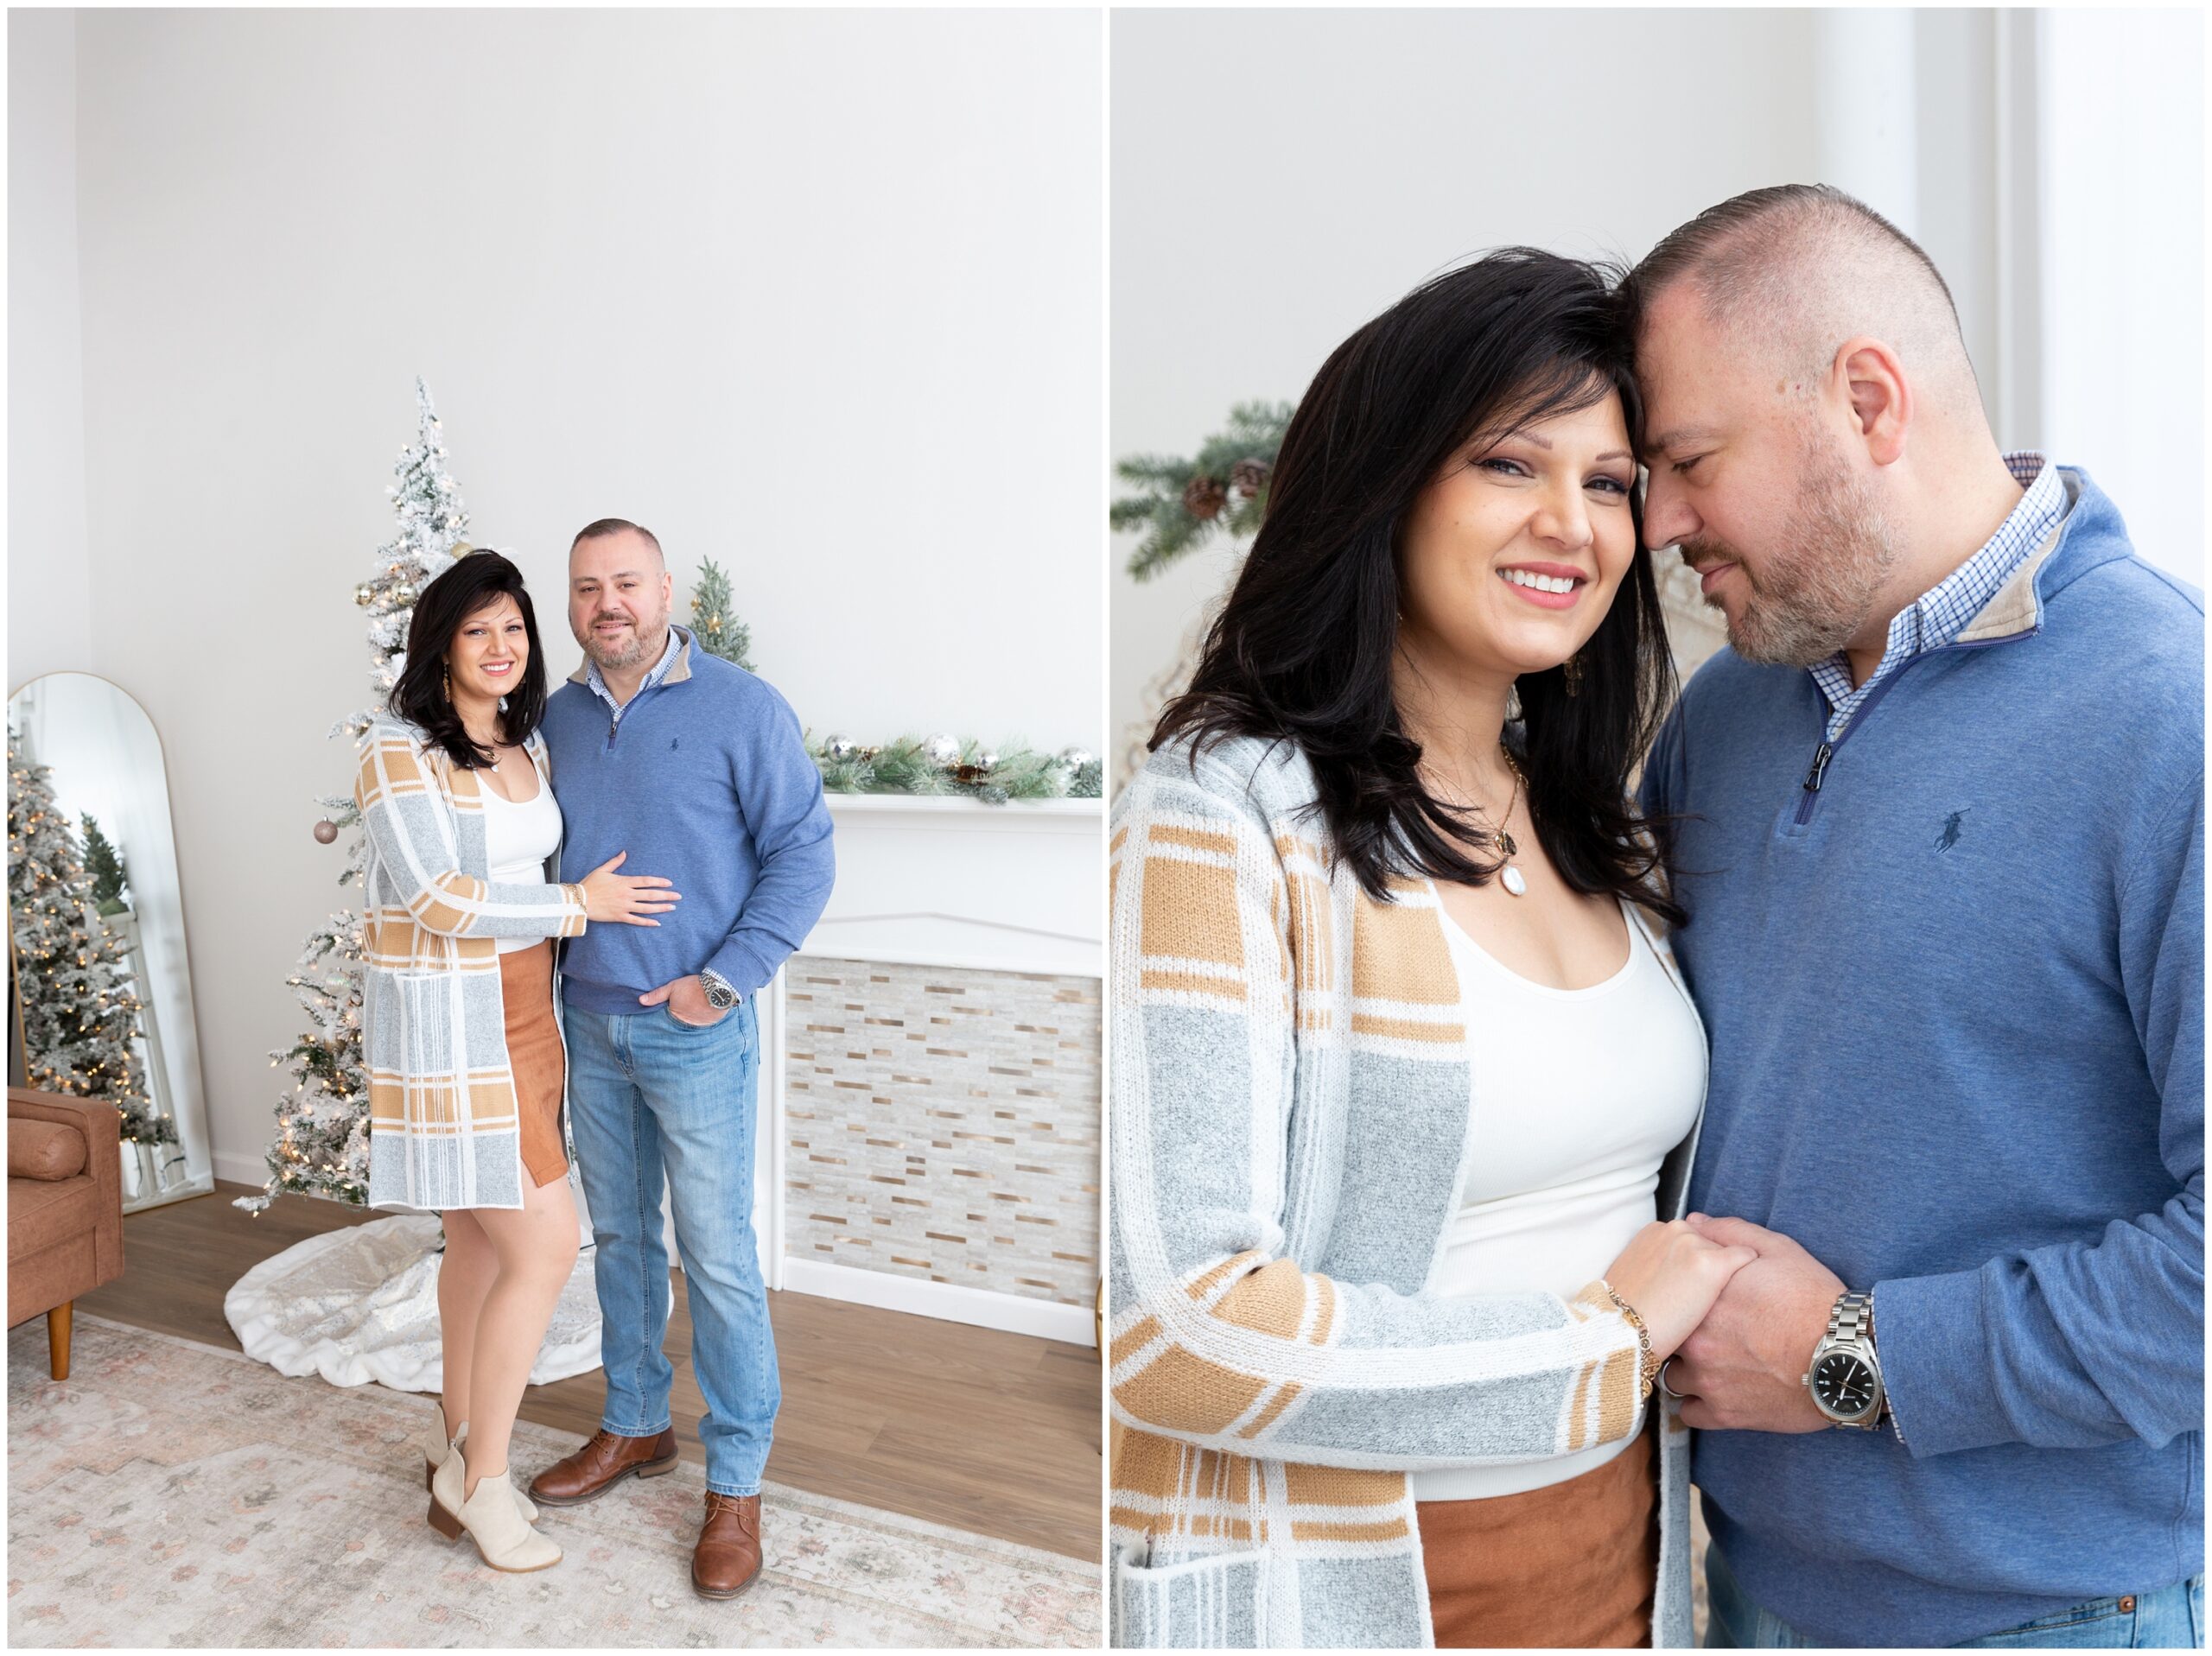 Pittsburgh Studio Holiday Mini Session, a Family Portrait Session photographed by Pittsburgh Family Photographer, Acevedo Weddings